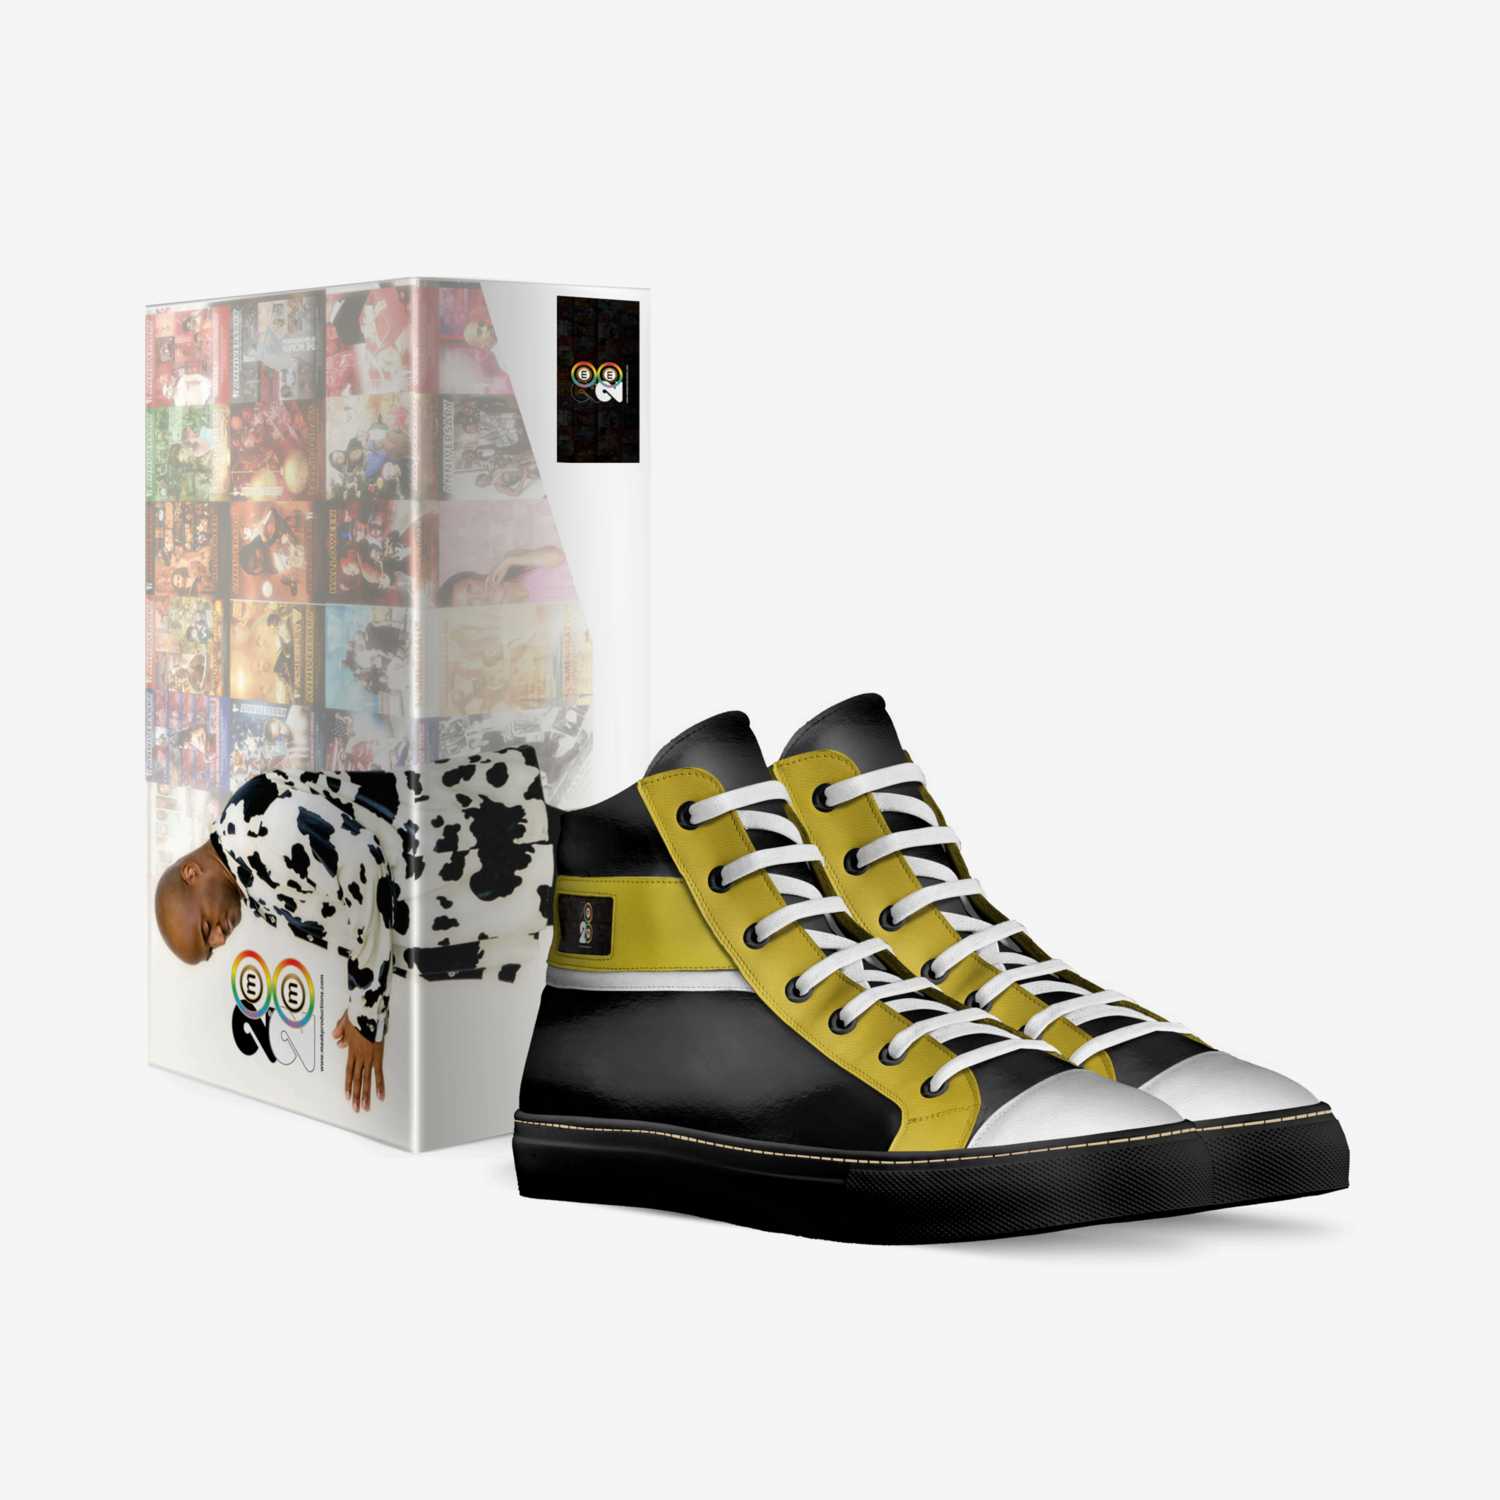 Meak Pro Exclusive custom made in Italy shoes by Meak Productions, Inc. | Box view